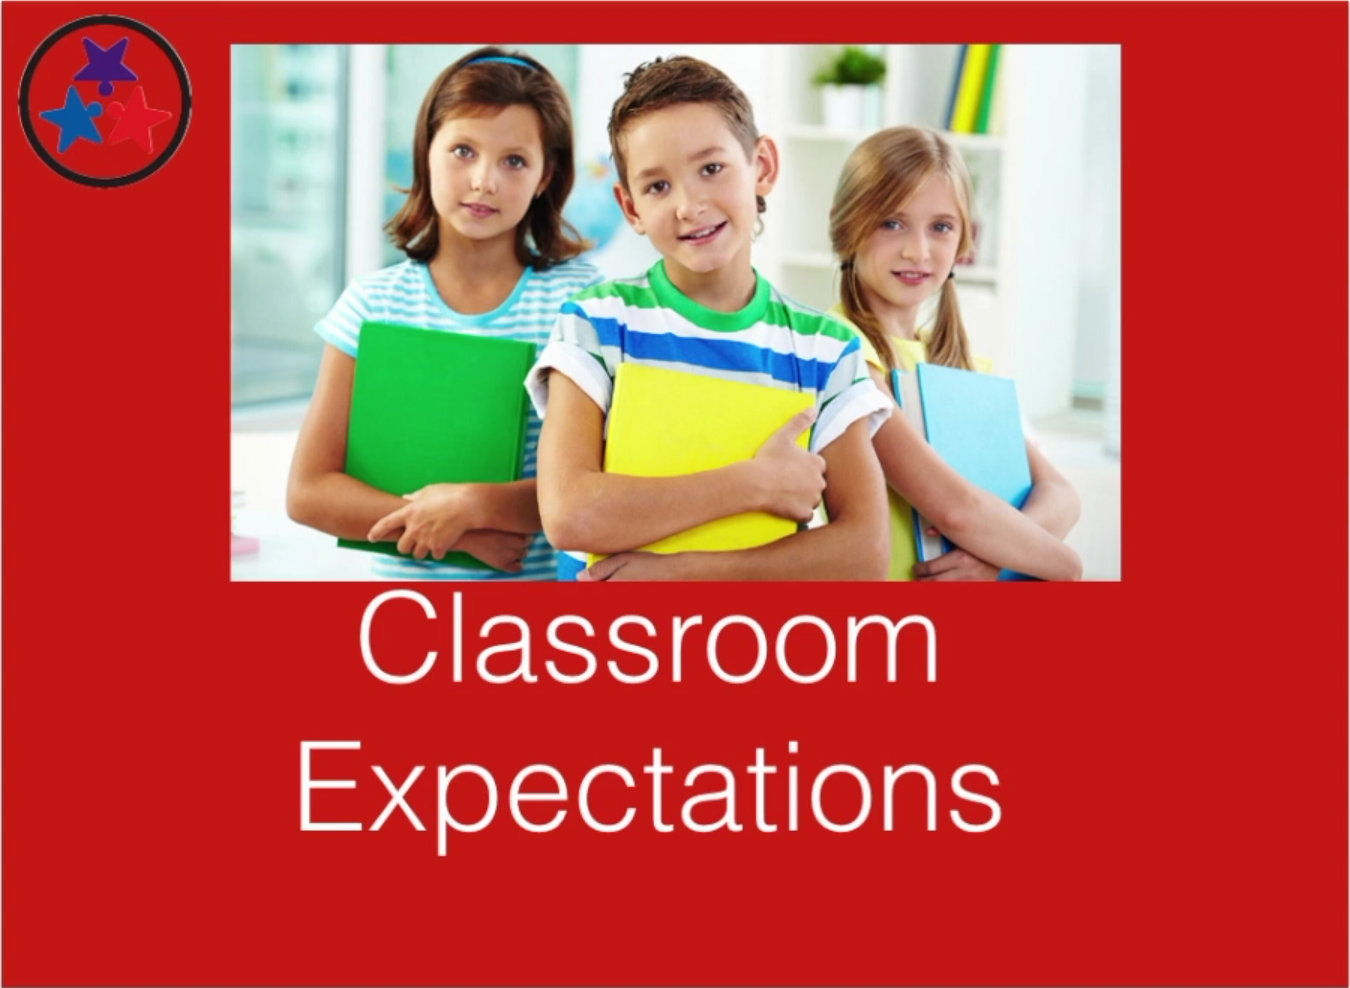 Classroom Management 3 - Teaching Class-wide Expectations and Procedures